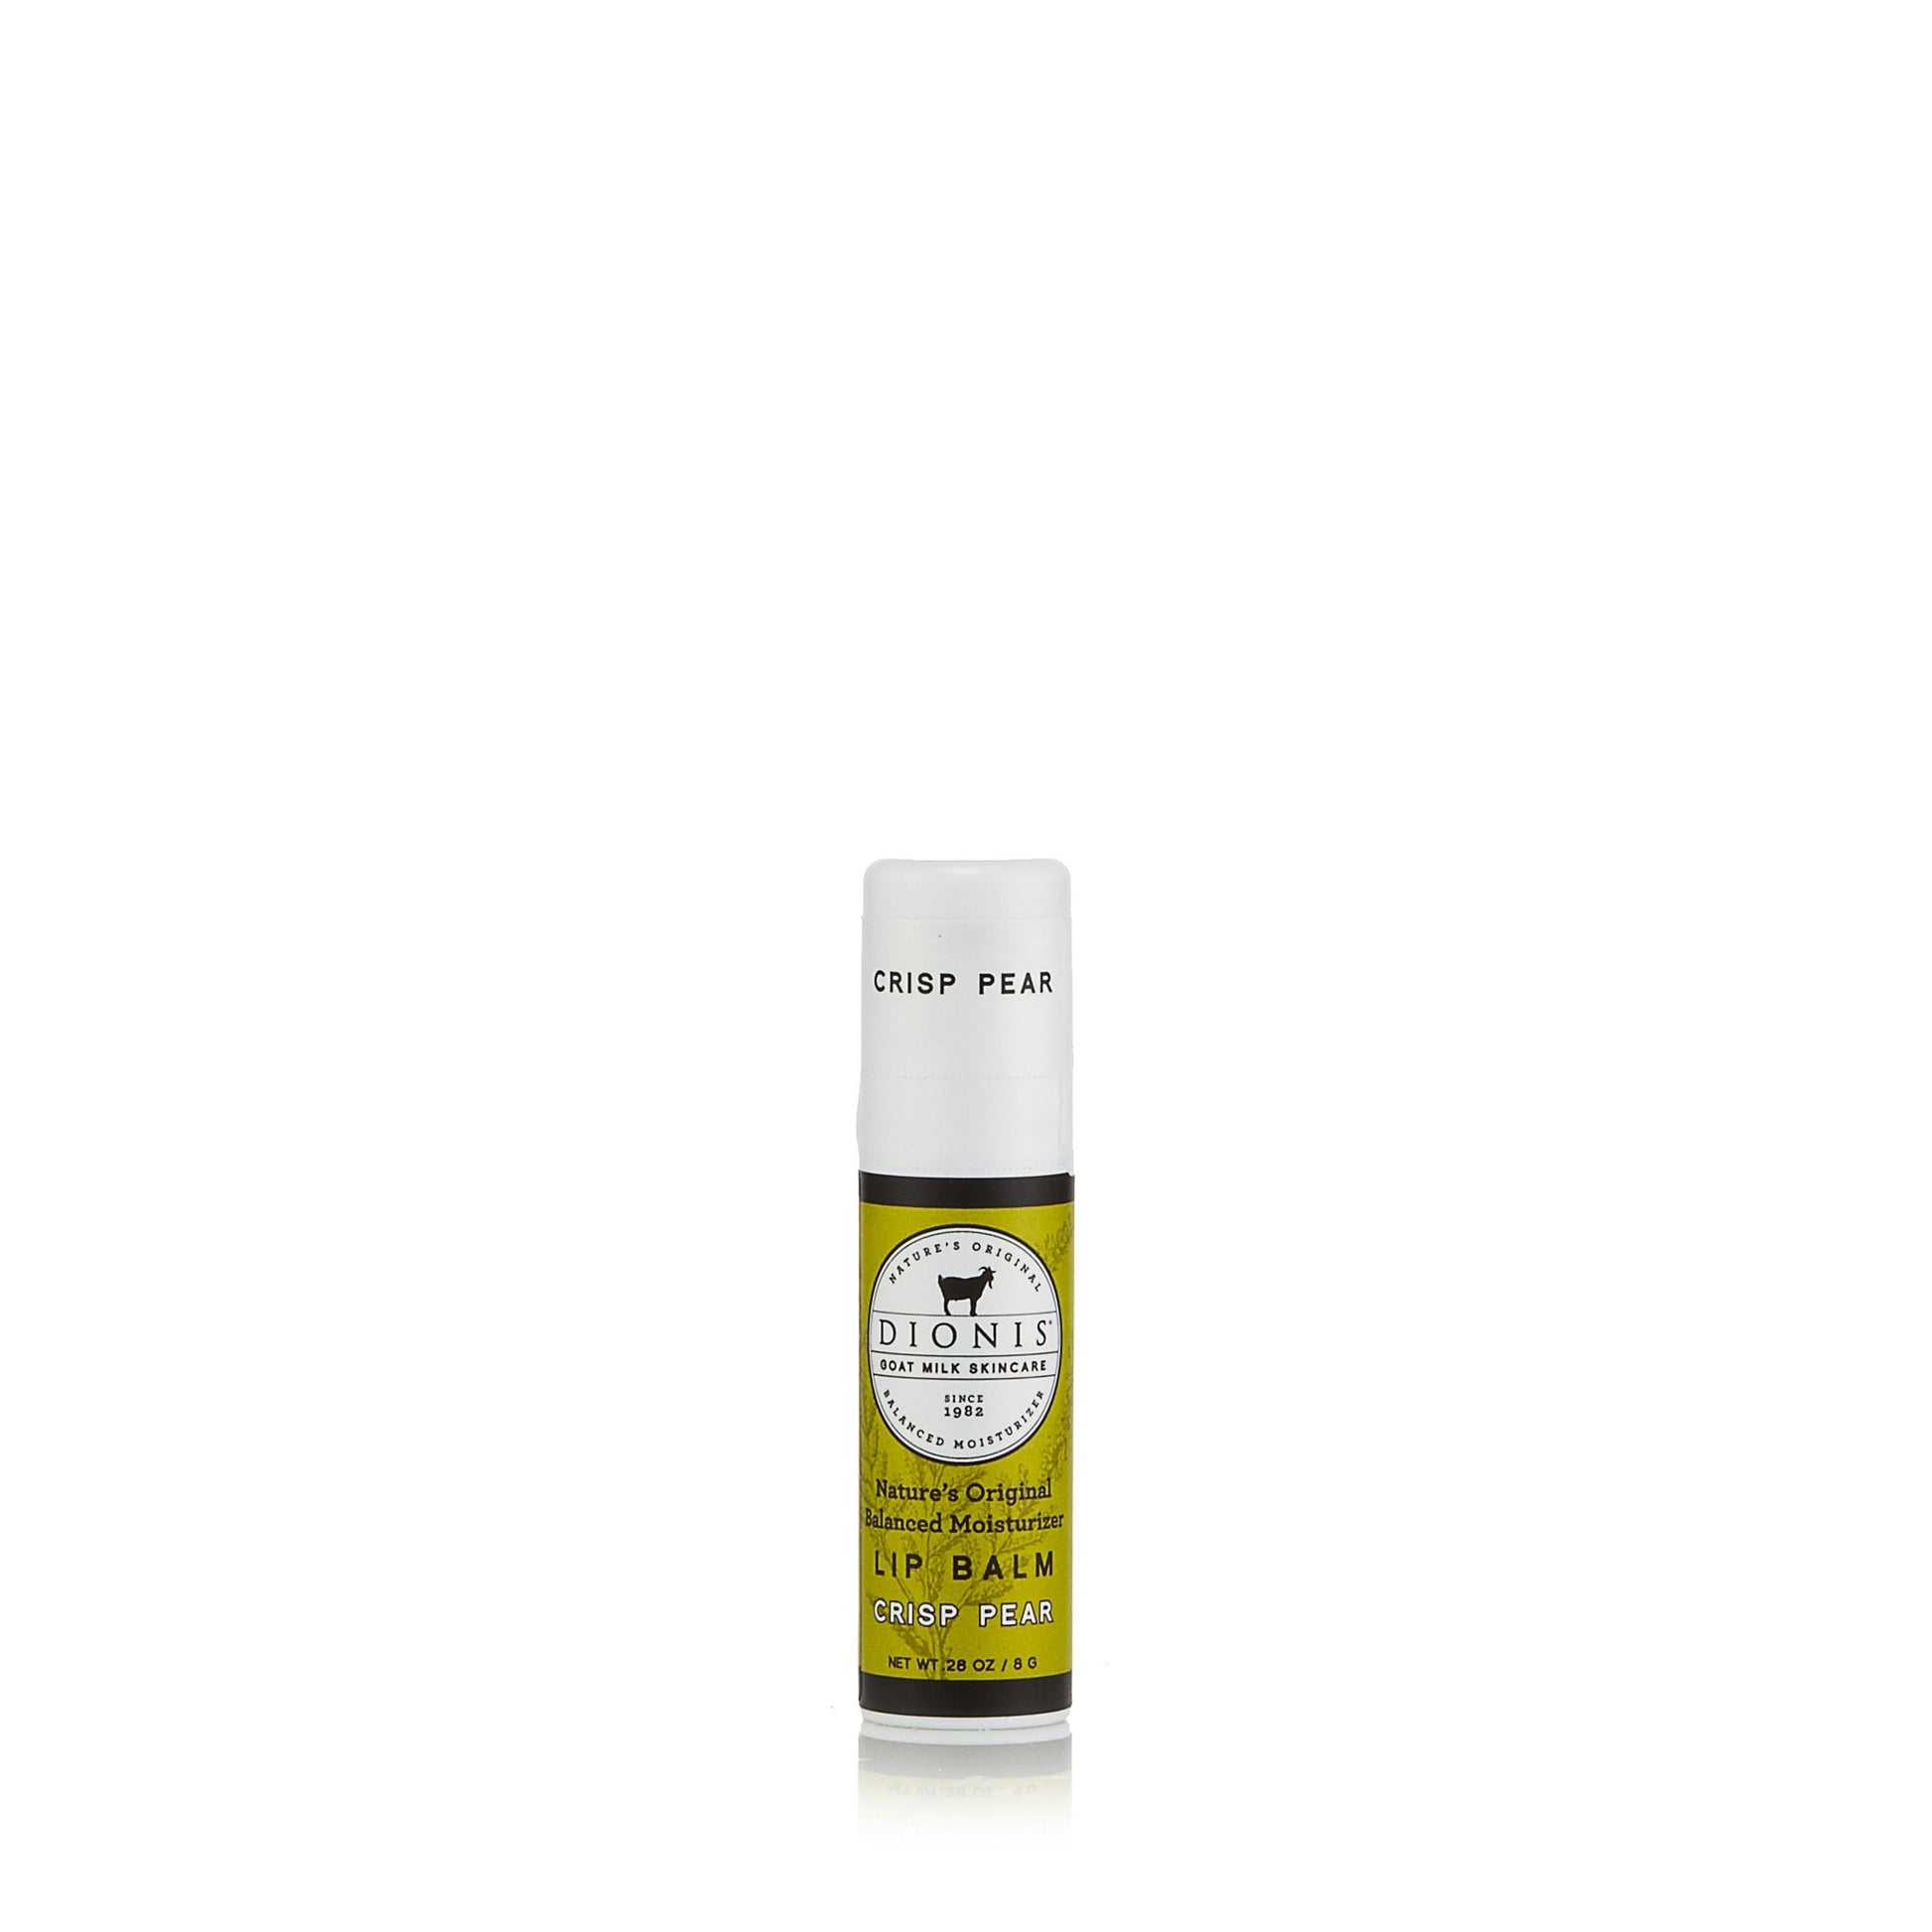  Lip Balm by Dionis Crisp Pear Click to open in modal